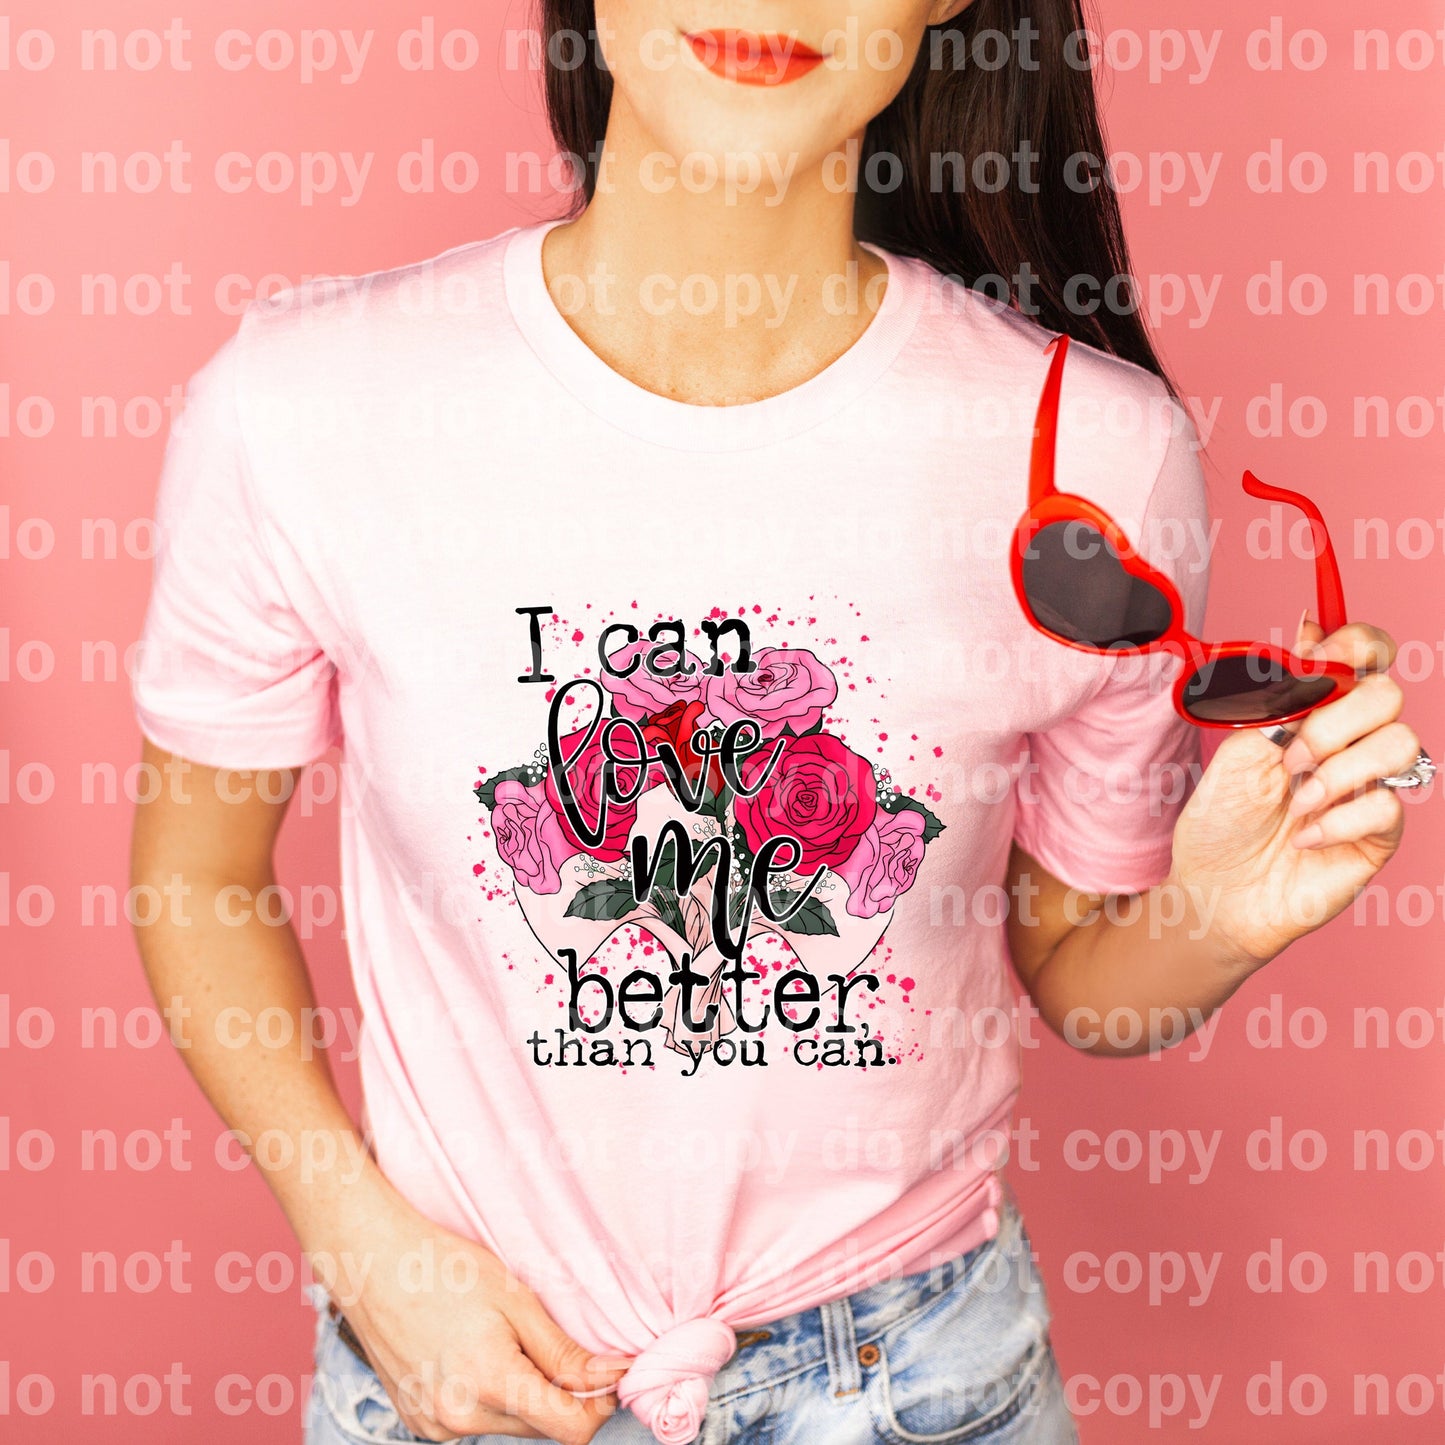 I Can Love Me Better Than You Can Dream Print or Sublimation Print